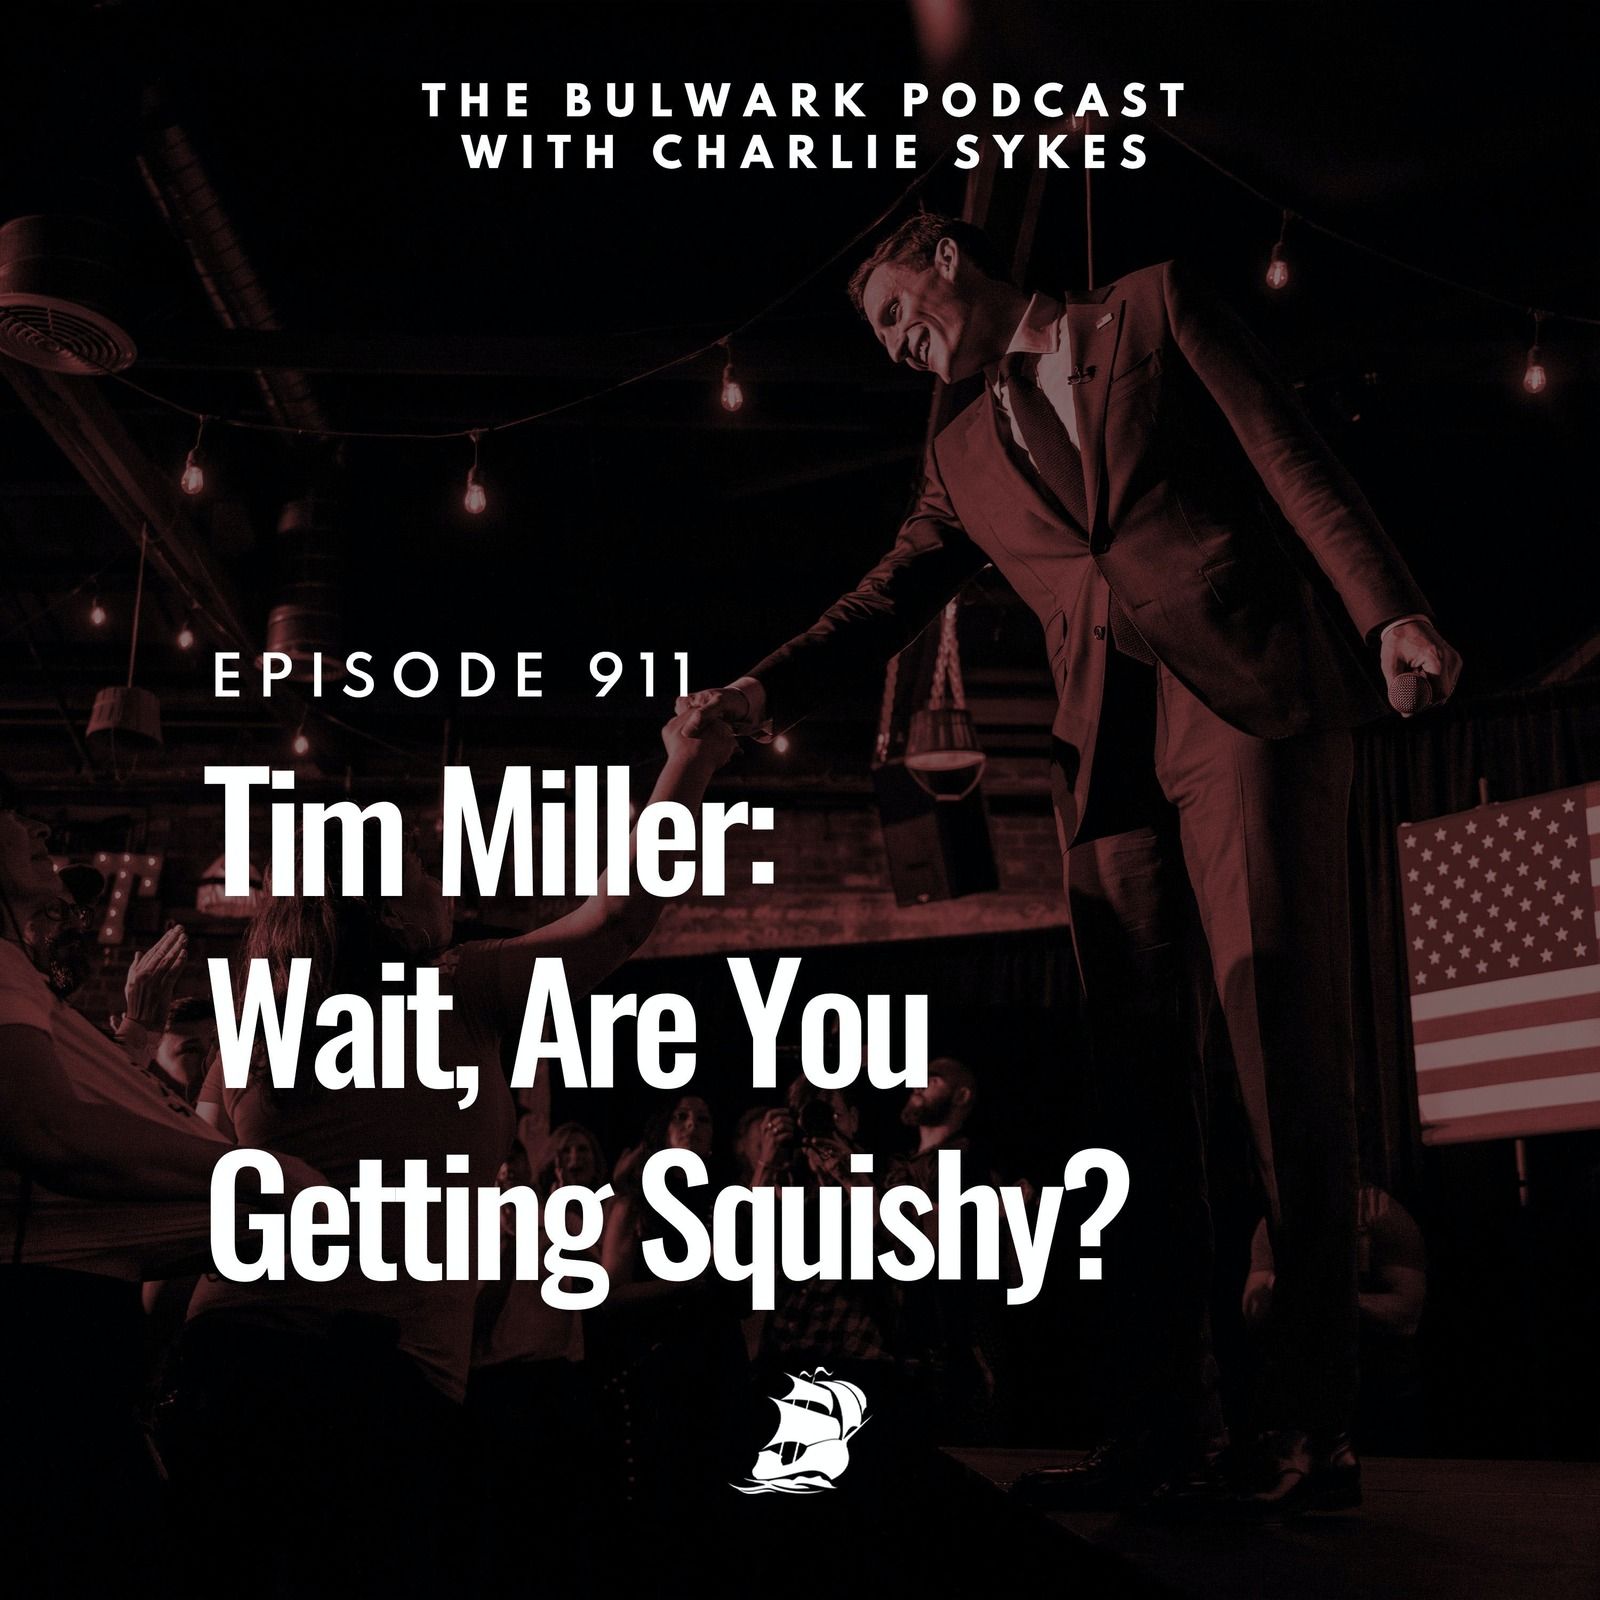 Tim Miller: Wait, Are You Getting Squishy?